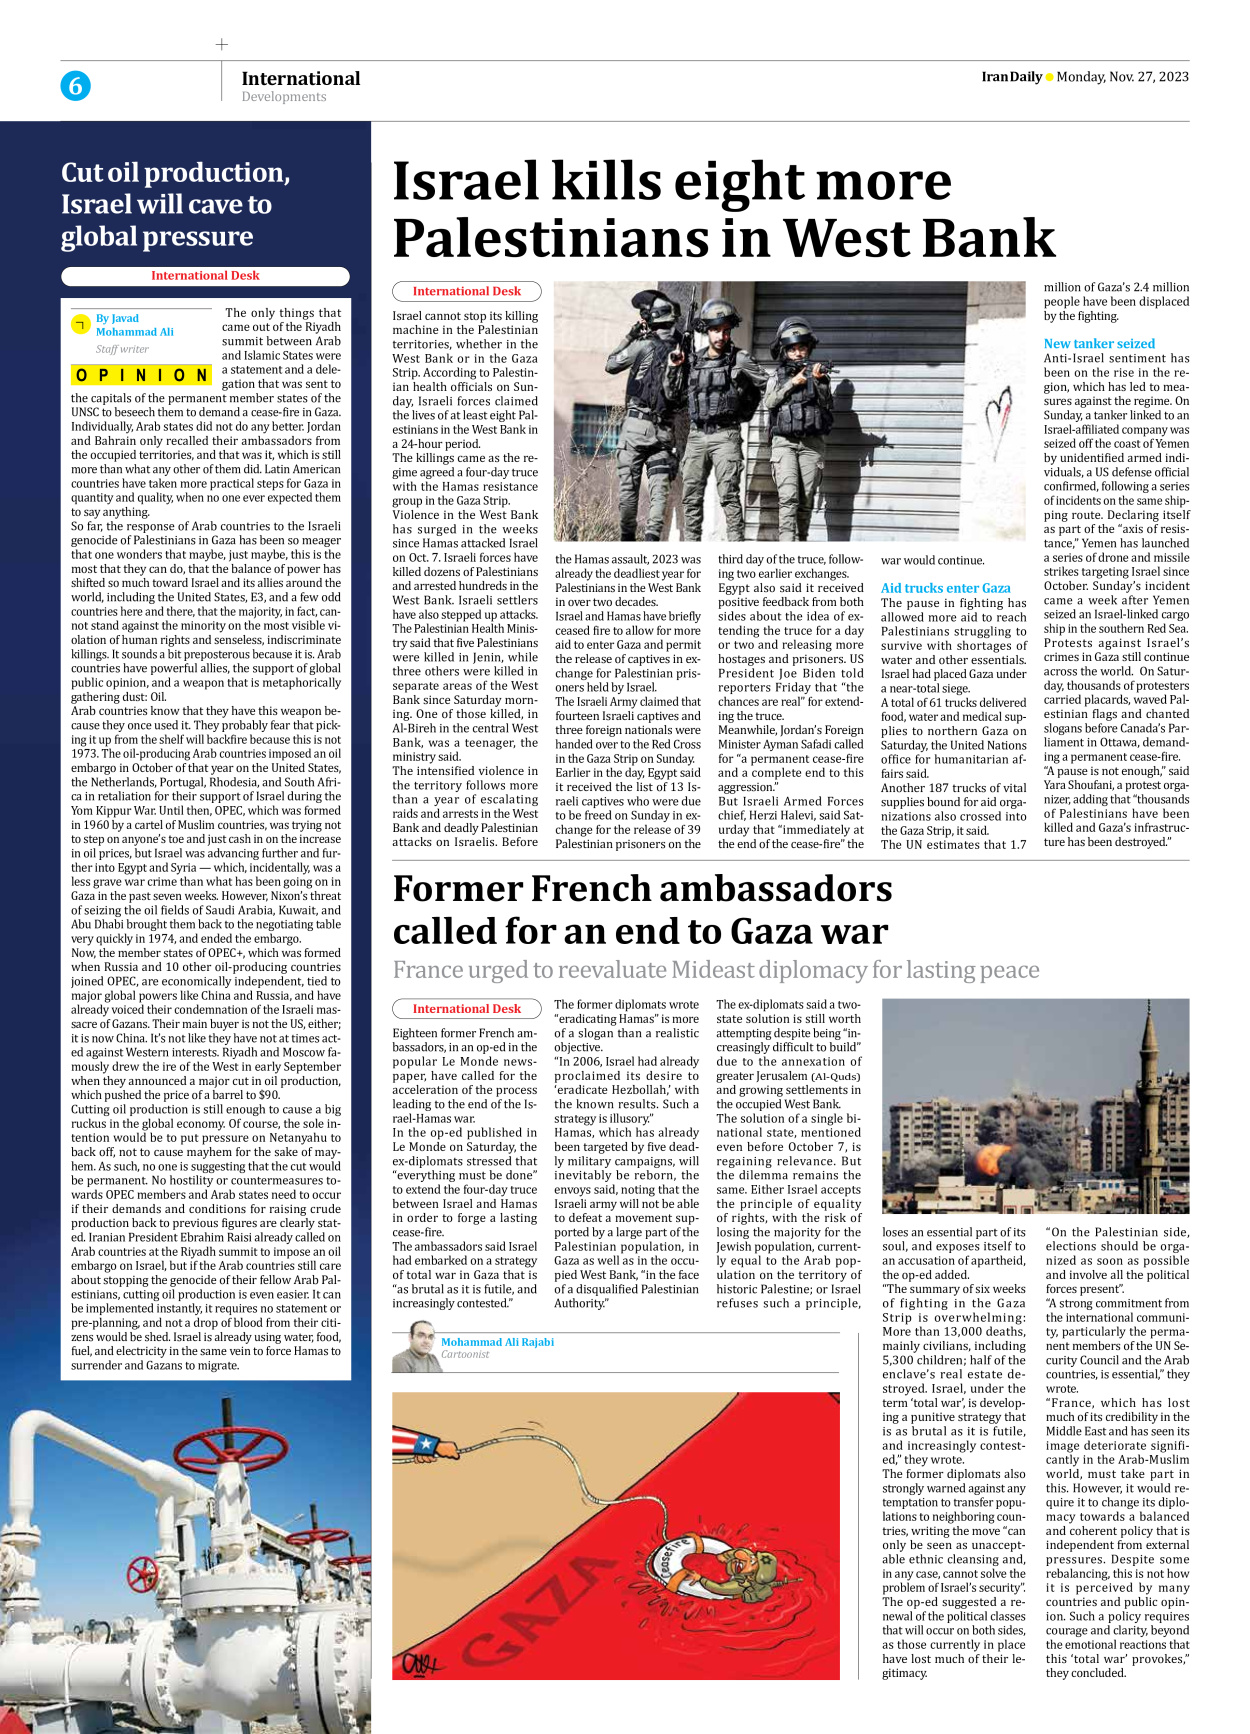 Iran Daily - Number Seven Thousand Four Hundred and Forty Five - 27 November 2023 - Page 6